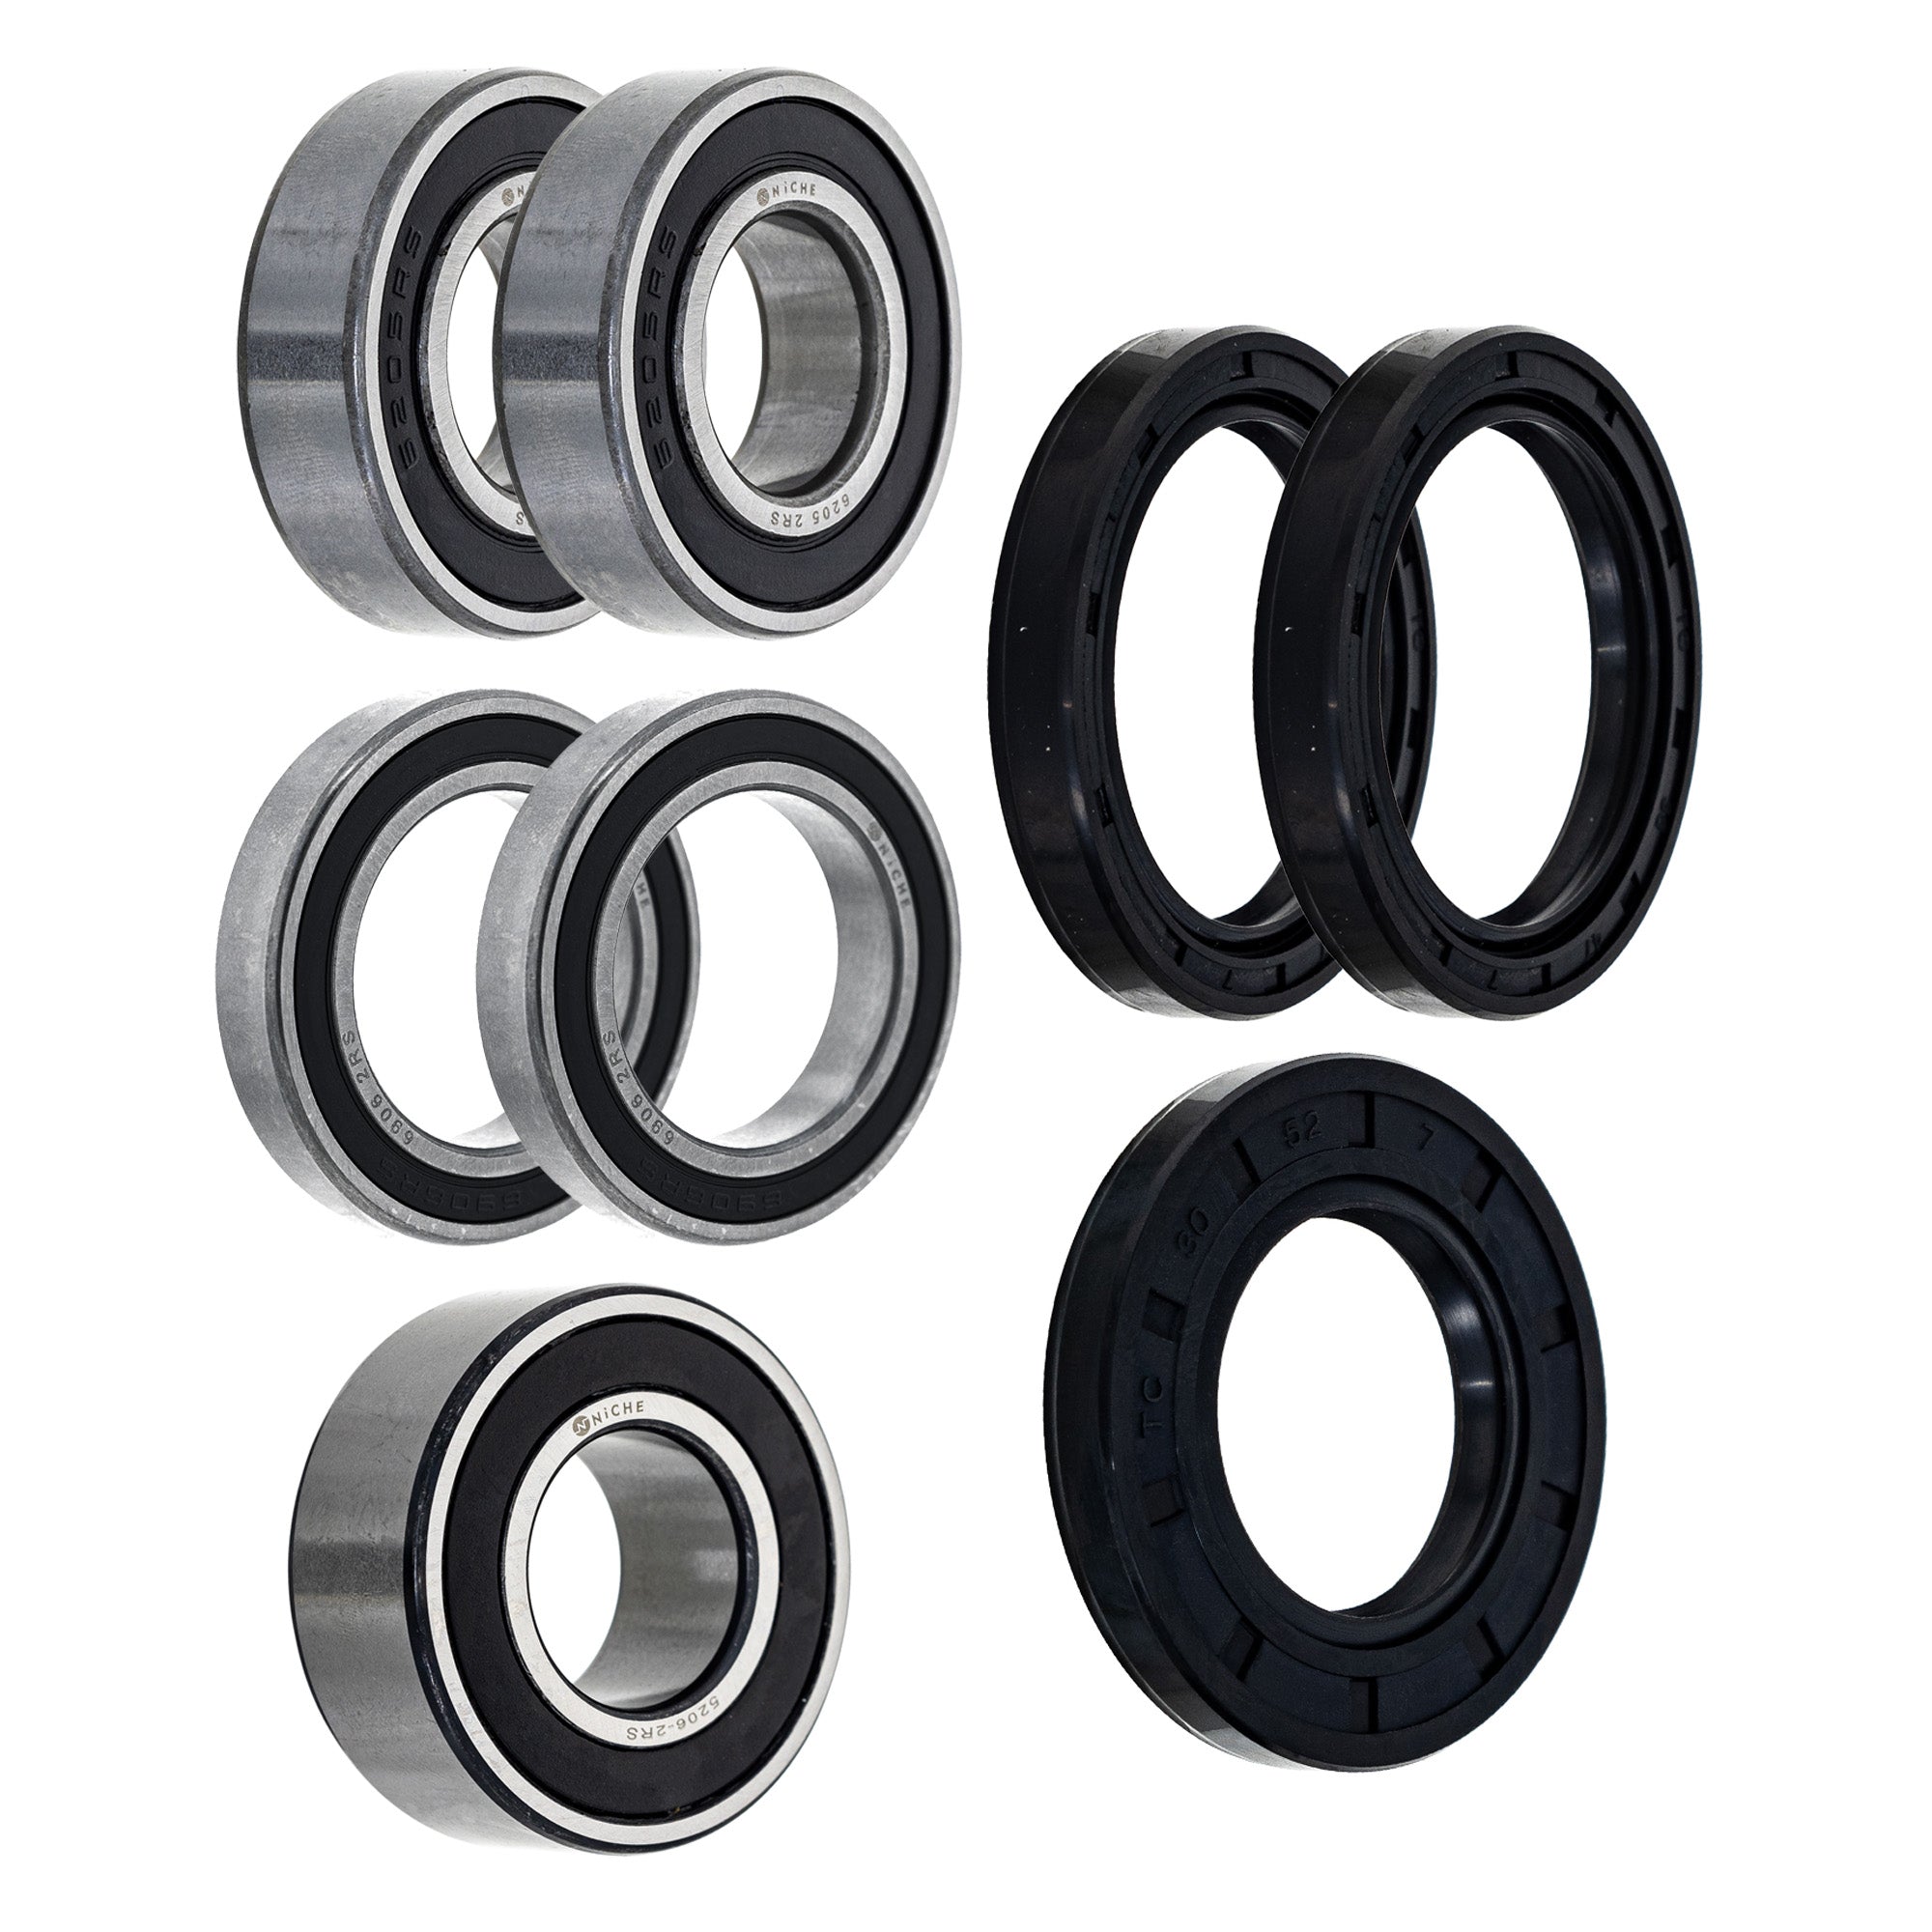 Wheel Bearing Seal Kit for zOTHER Ref No 950 NICHE MK1008729